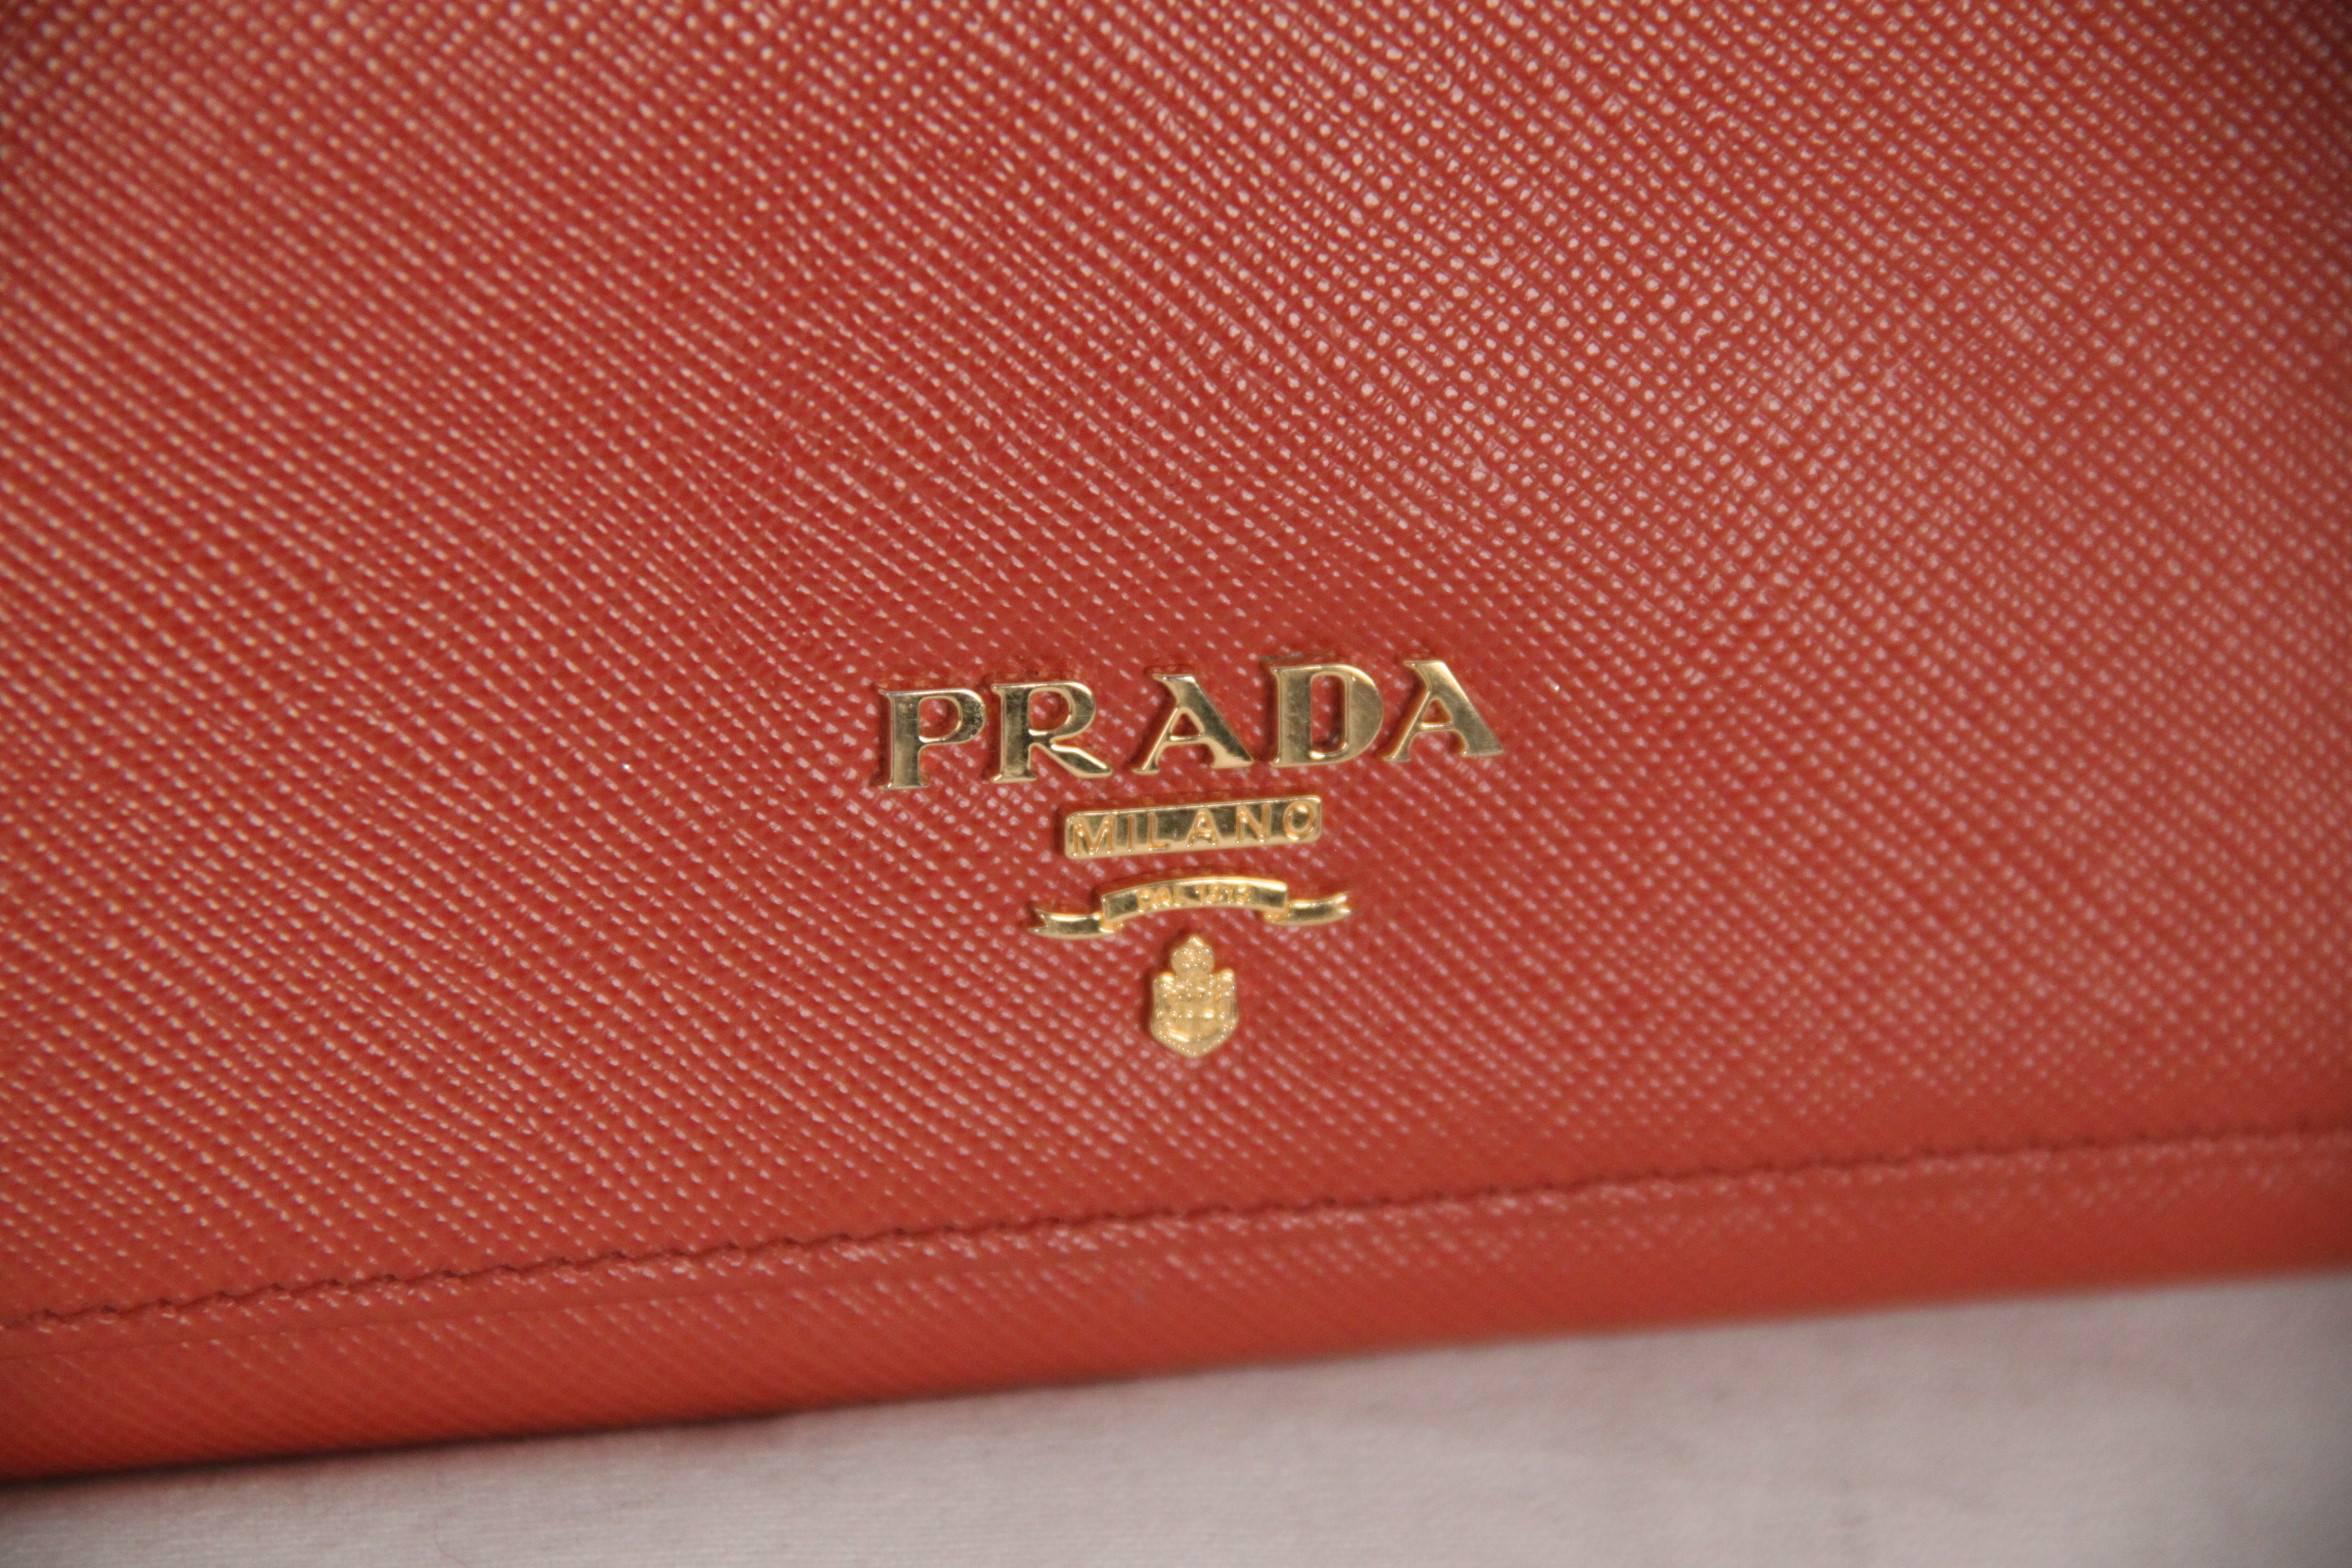  

- Leather flap wallet in orange color (official PRADA color is 'RAME') by PRADA
- Saffiano Leather
- Mod. 1M1132
- Gold-plated hardware
- Metal lettering logo
- Snap closure
- 10 credit card slots
- One coin compartment with zipper closure
- 2